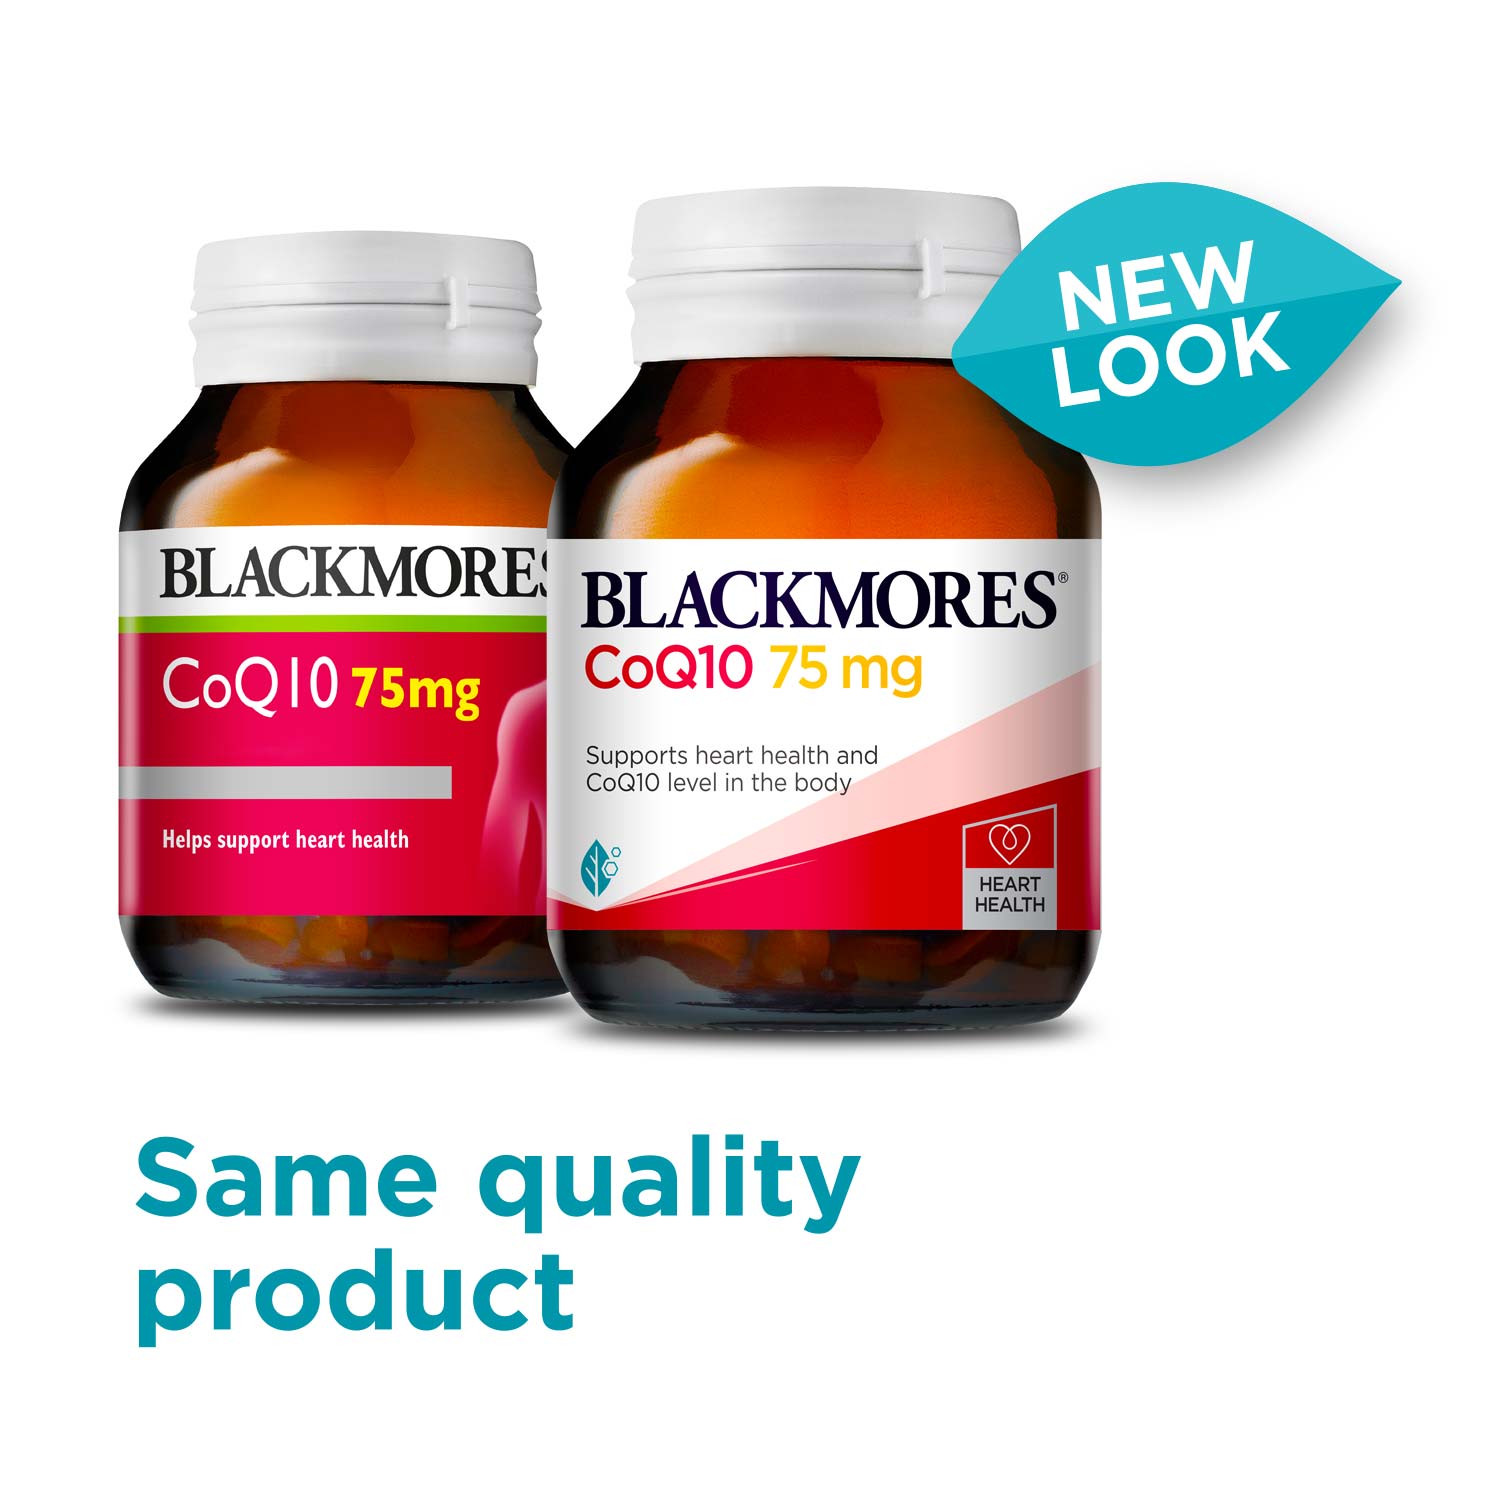 Blackmores CoQ10 75mg new look label